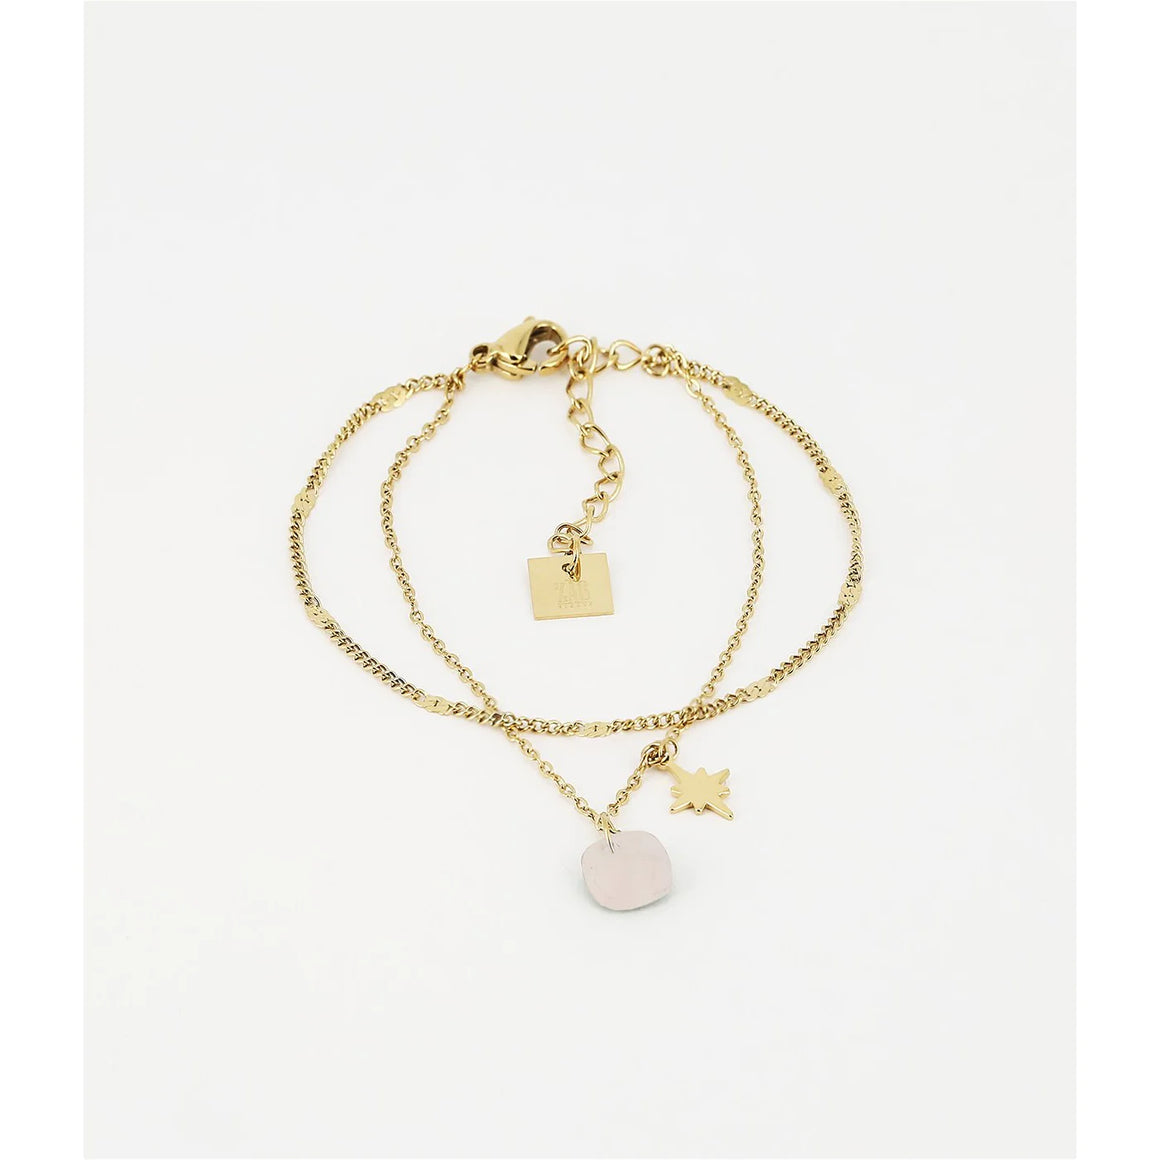 double gold chain bracelet with small rose quartz stone and gold star hanging